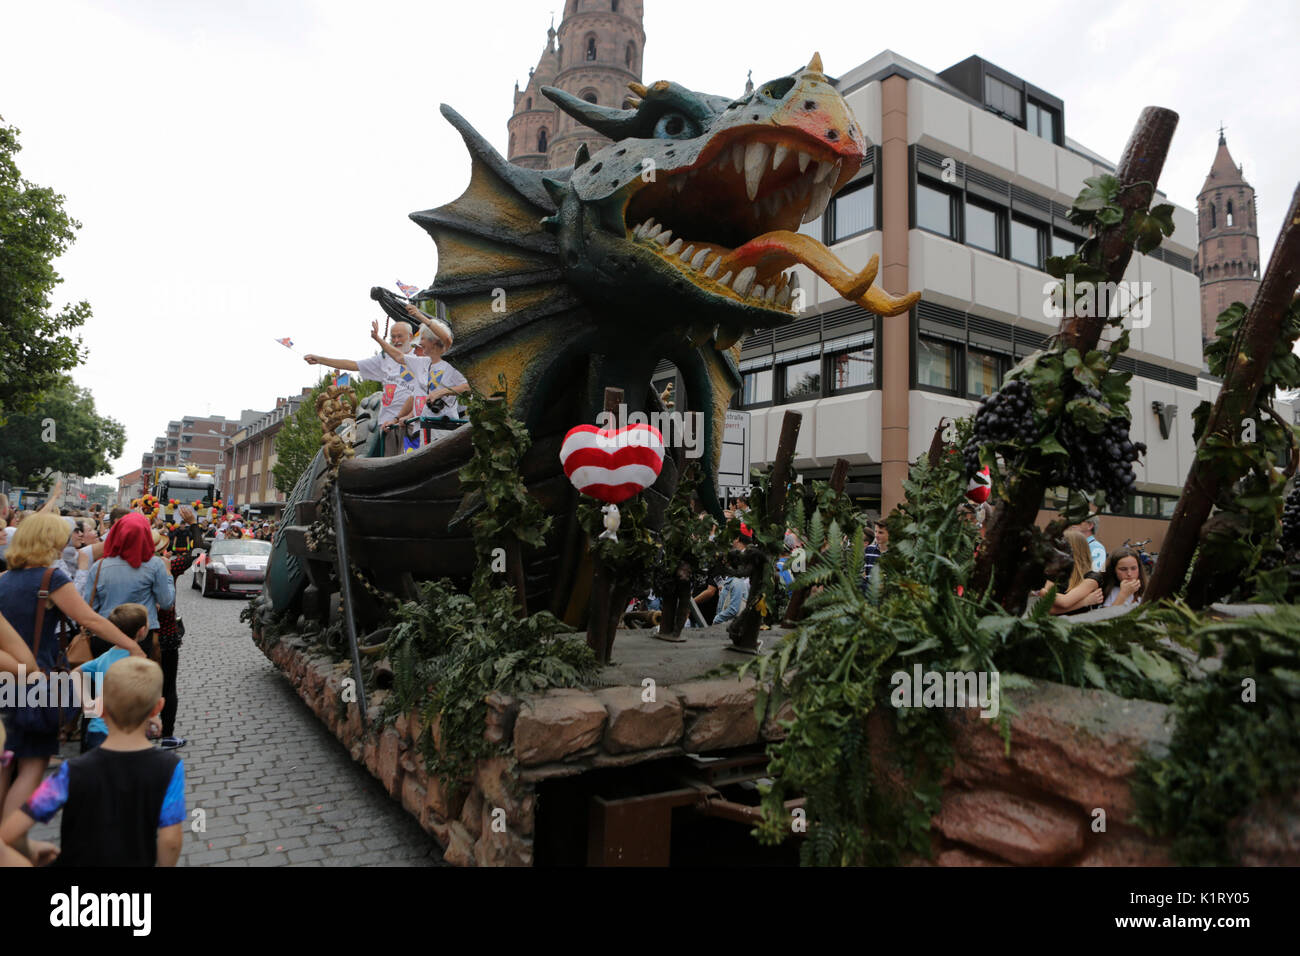 Worms, Germany. 27th August 2017. A large papier-mache dragon, the symbol of Worms, stands on a float. The first highlight of the 2017 Backfischfest was the big parade through the city of Worms with over 80 groups and floats. Community groups, music groups and business from Worms and further afield took part. Credit: Michael Debets/Alamy Live News Stock Photo